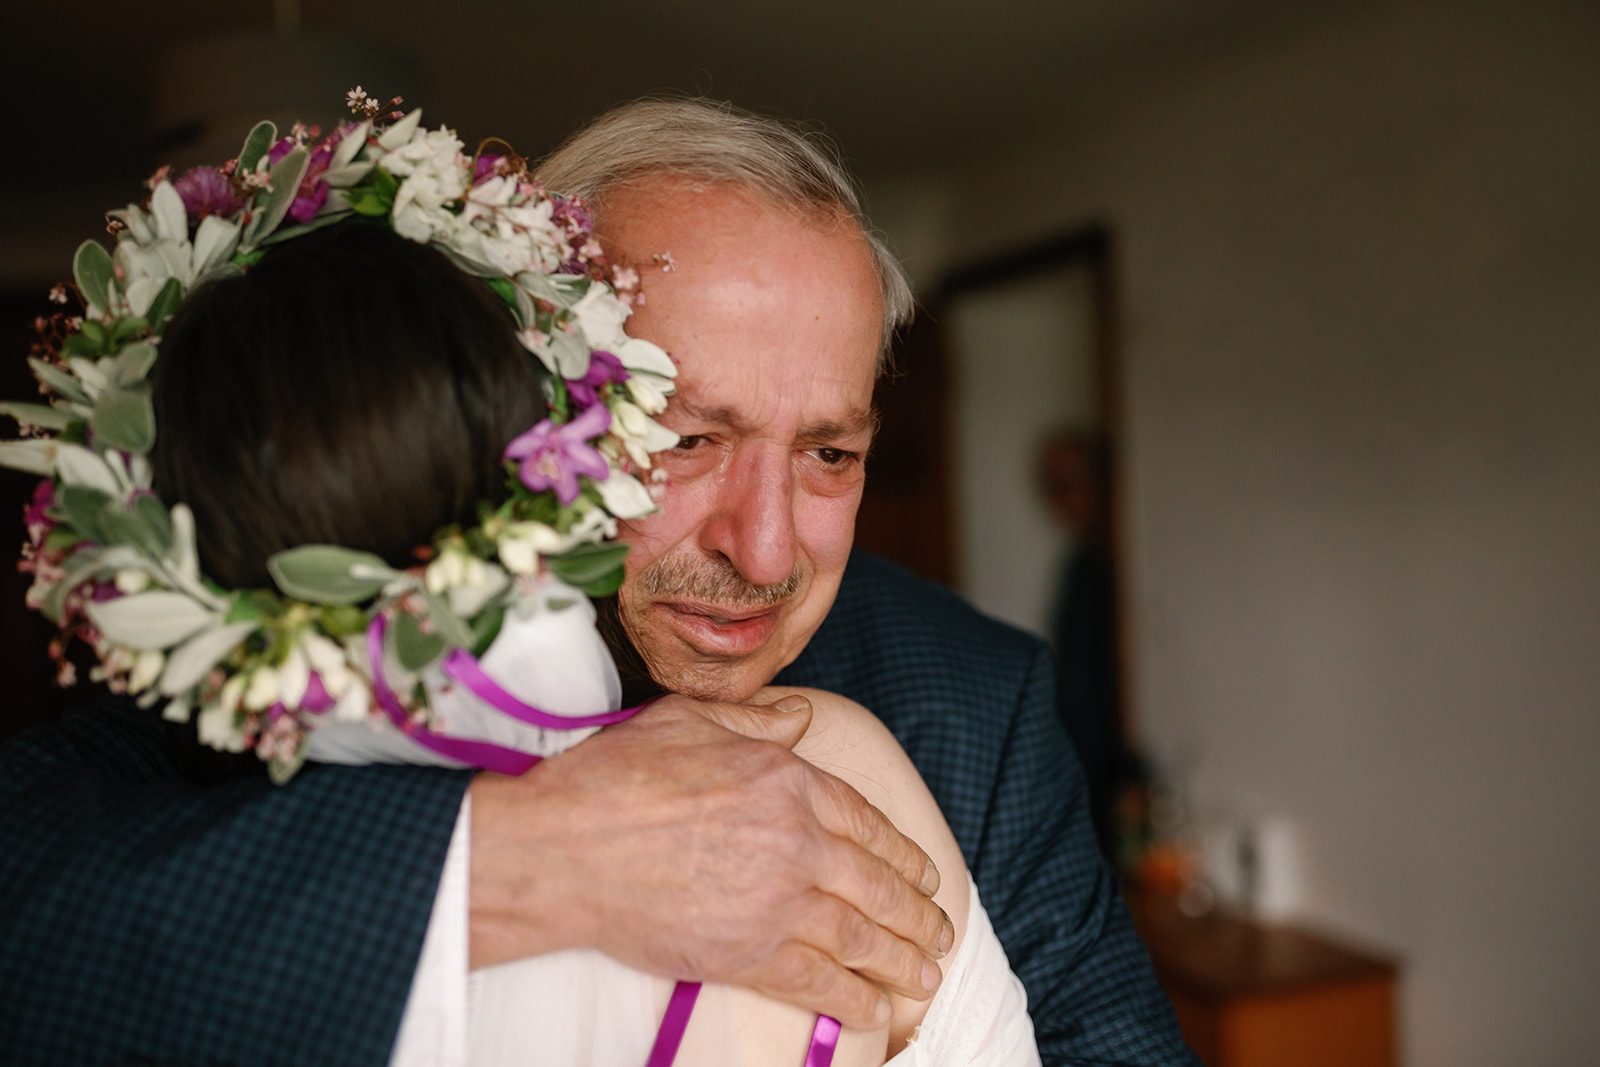 Bride Becca, emotionally embraced by her father, shares a first look moment during their Isle of elopement day